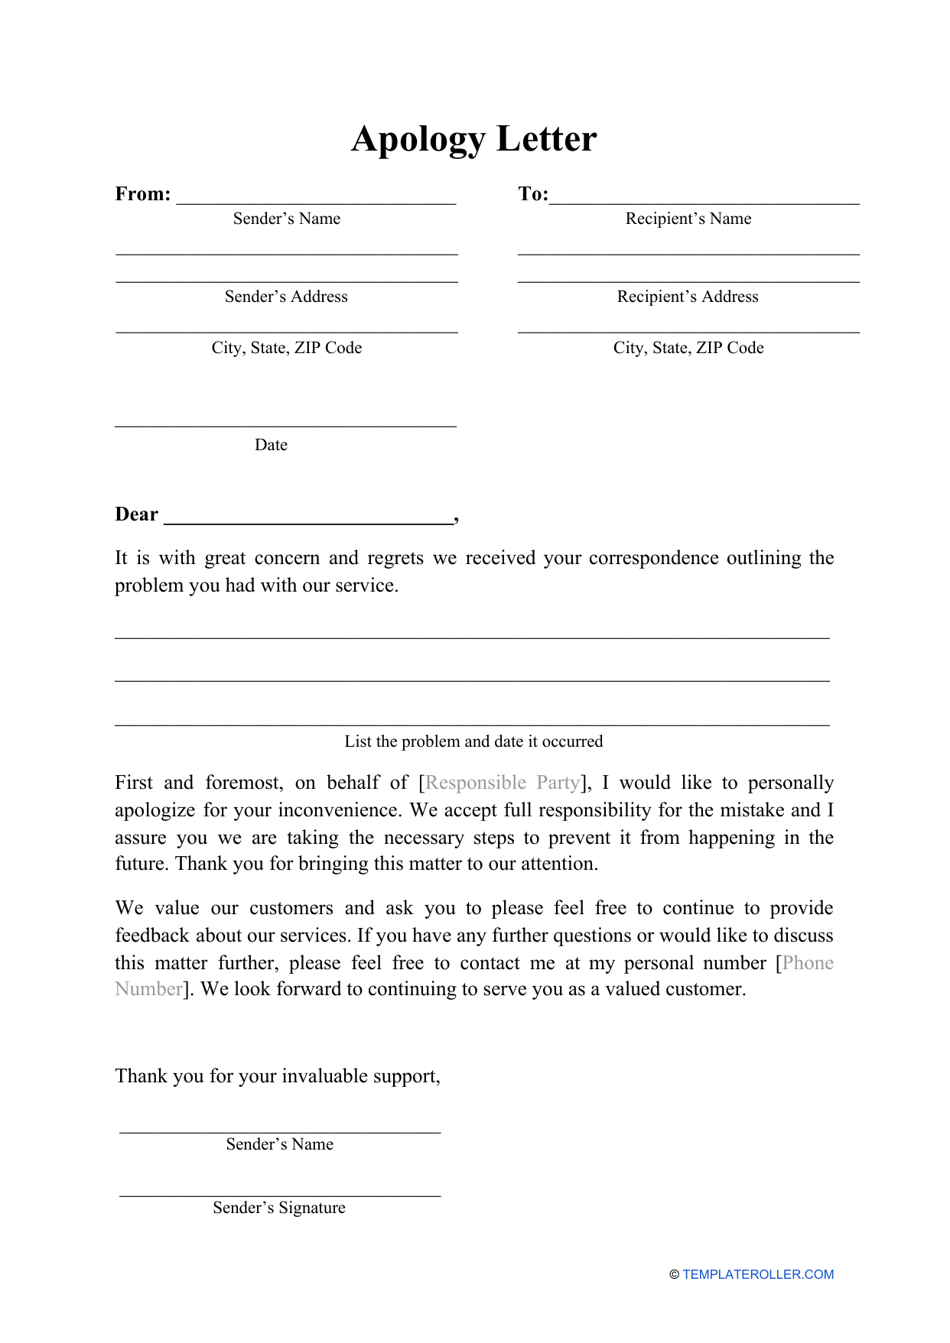 Apology Letter Template - customizable and printable letter sample